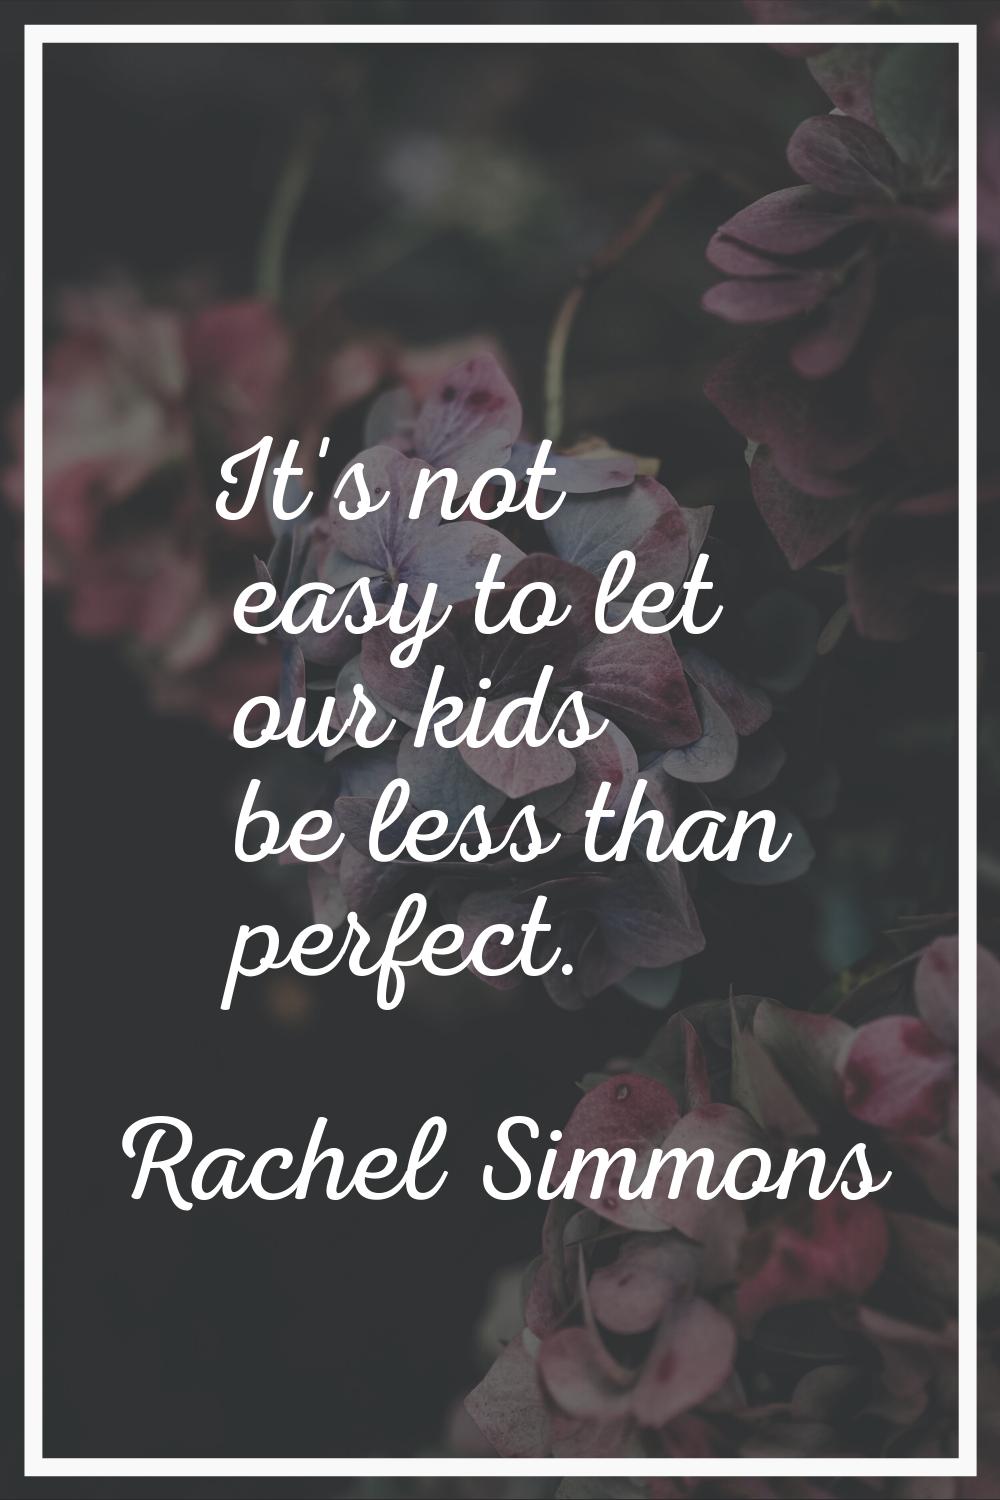 It's not easy to let our kids be less than perfect.